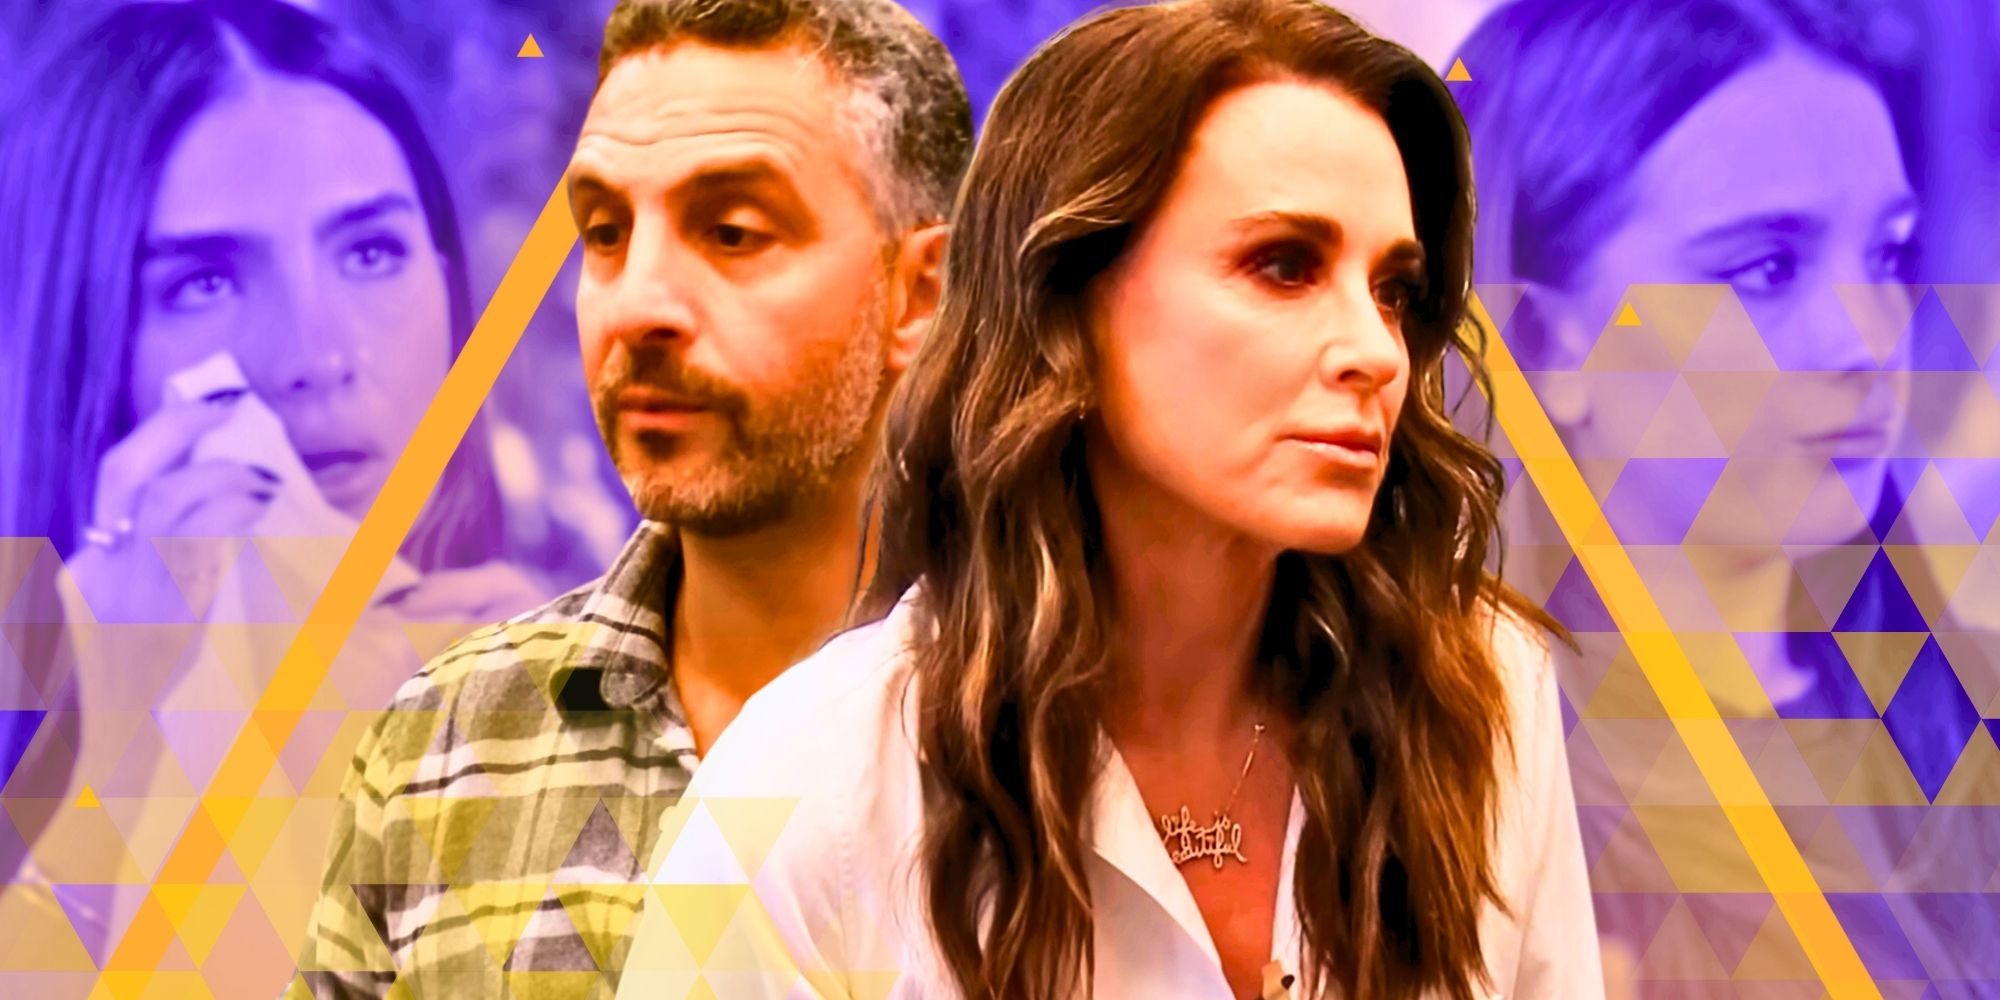 Buying Beverly Hills's Mauricio Umansky and Kyle Richards, with their emotional daughters behind them